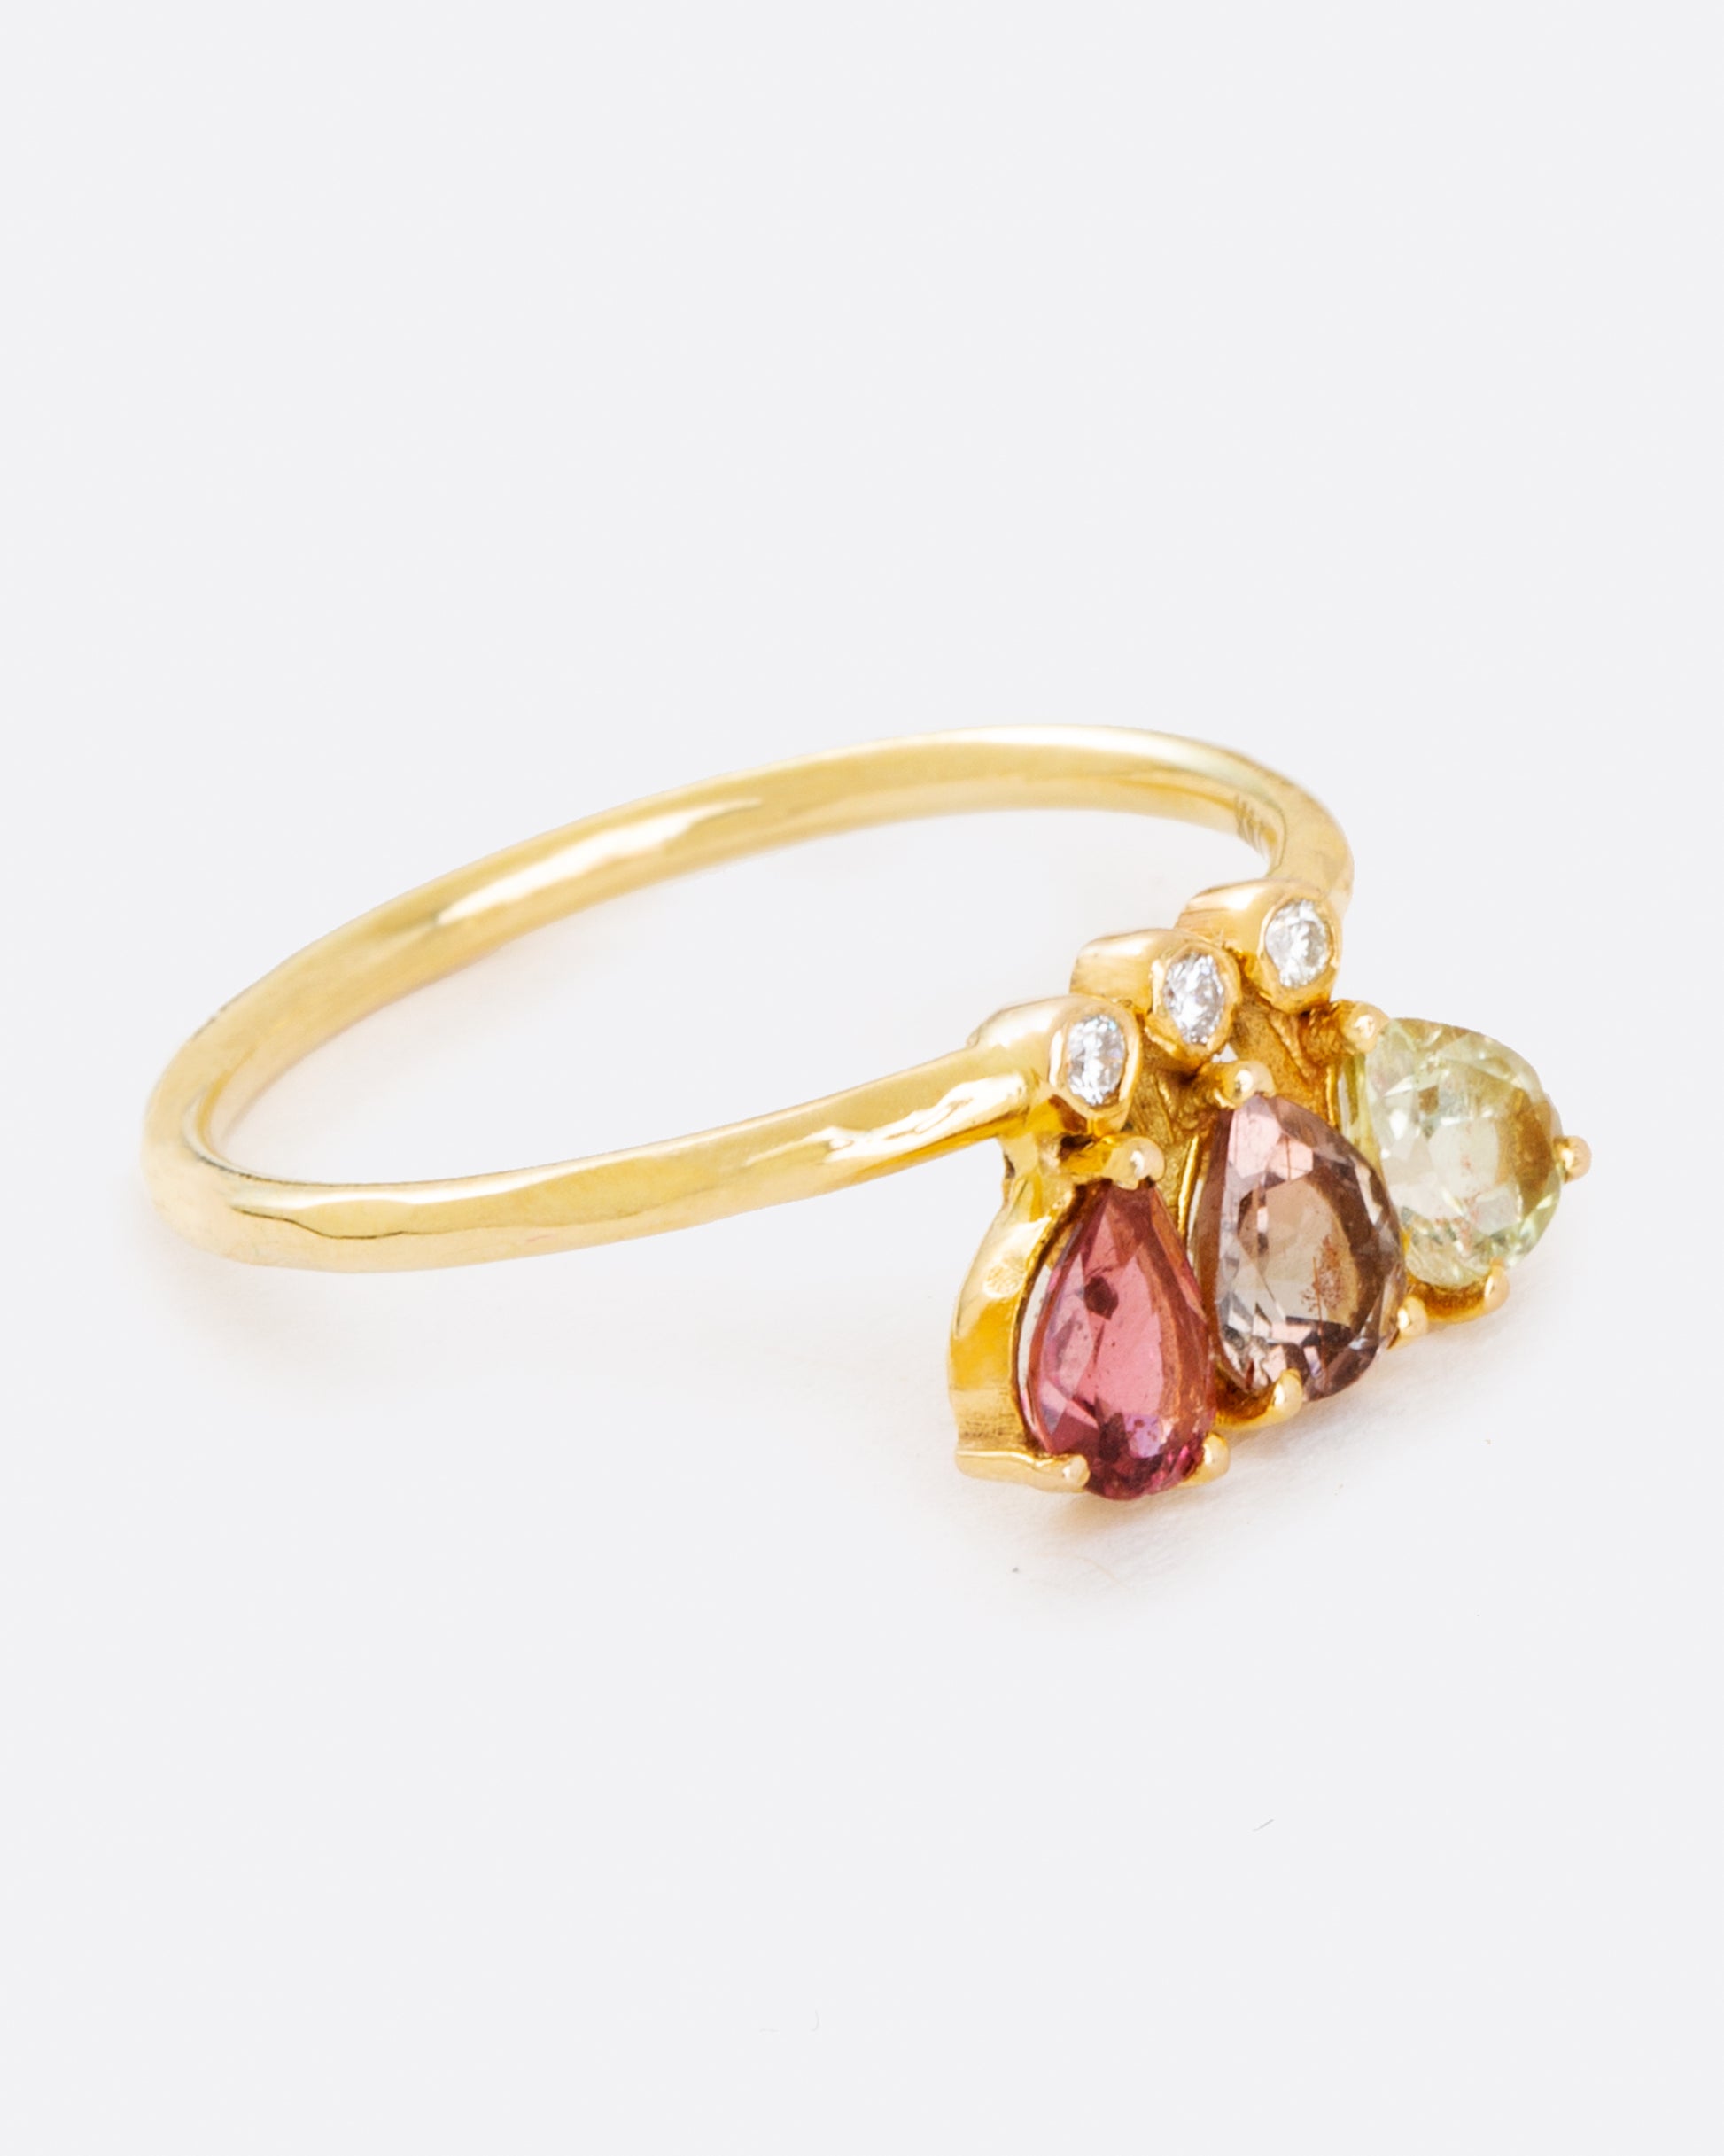 A crown of pear shaped green, red, and pink tourmalines leap from bezel set diamonds on a thin, solid 14 karat gold band.